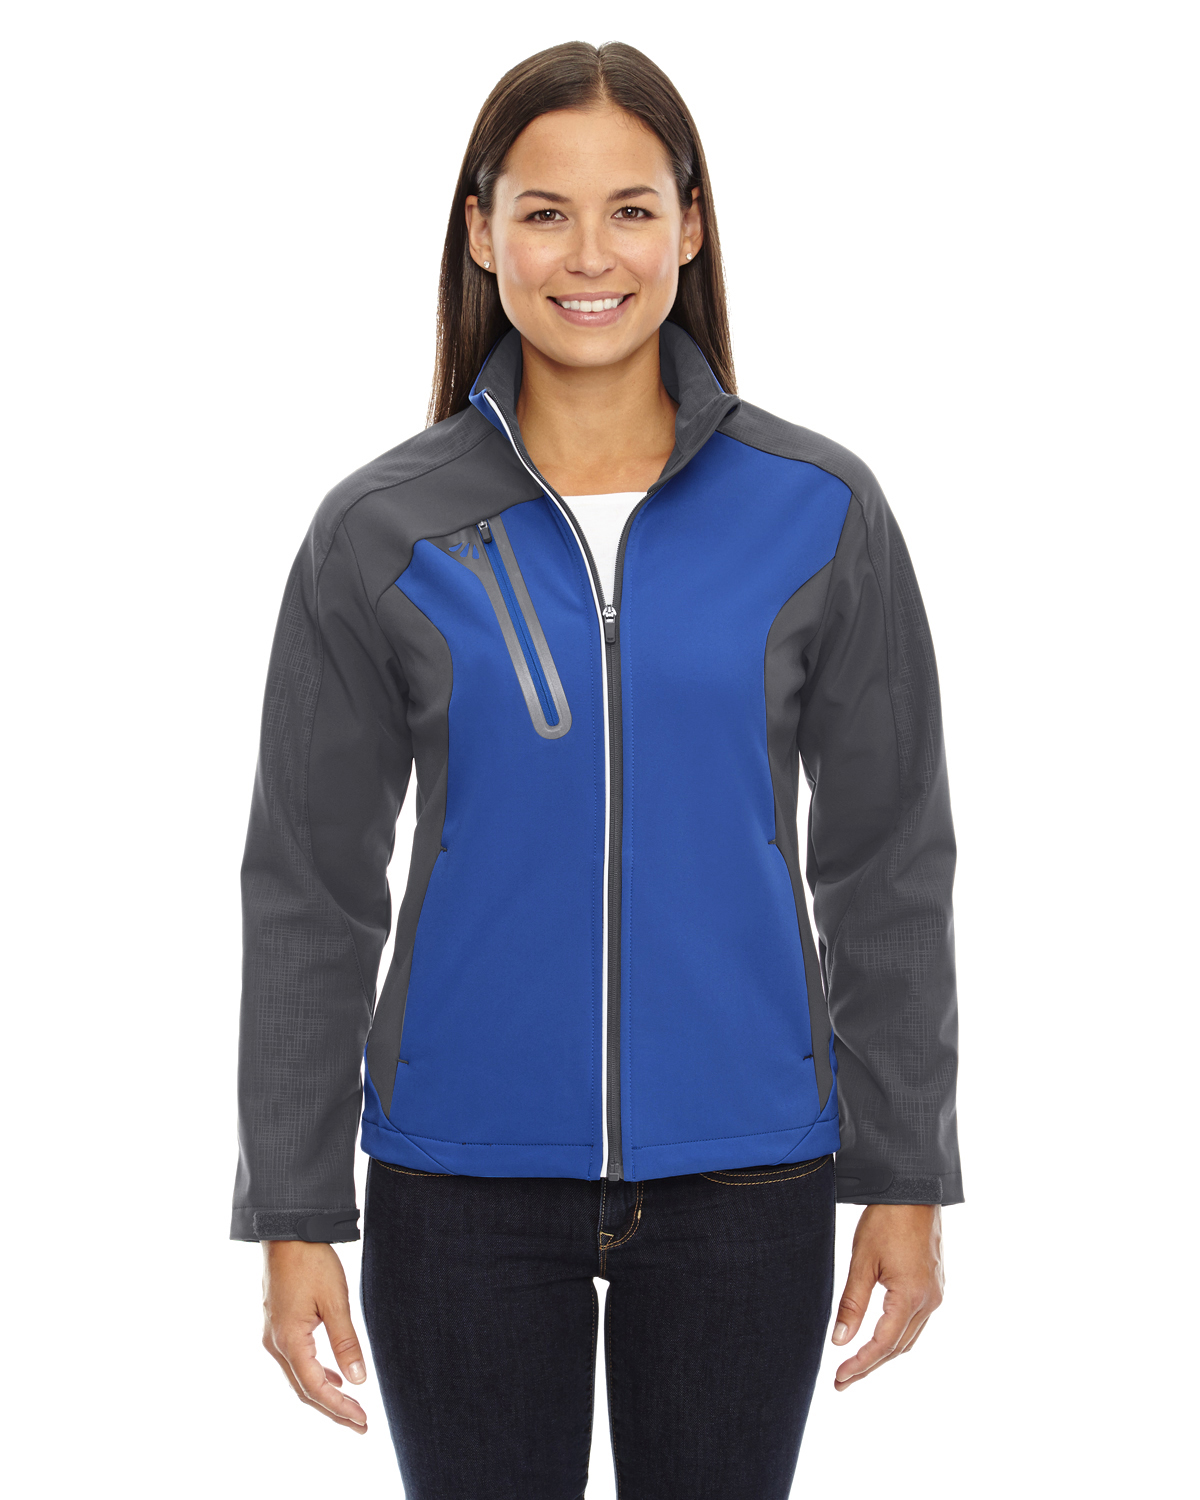 The Ash City - North End Ladies' Terrain Colorblock Soft Shell with Embossed Print - NAUTICL BLUE 413 - L - image 1 of 2